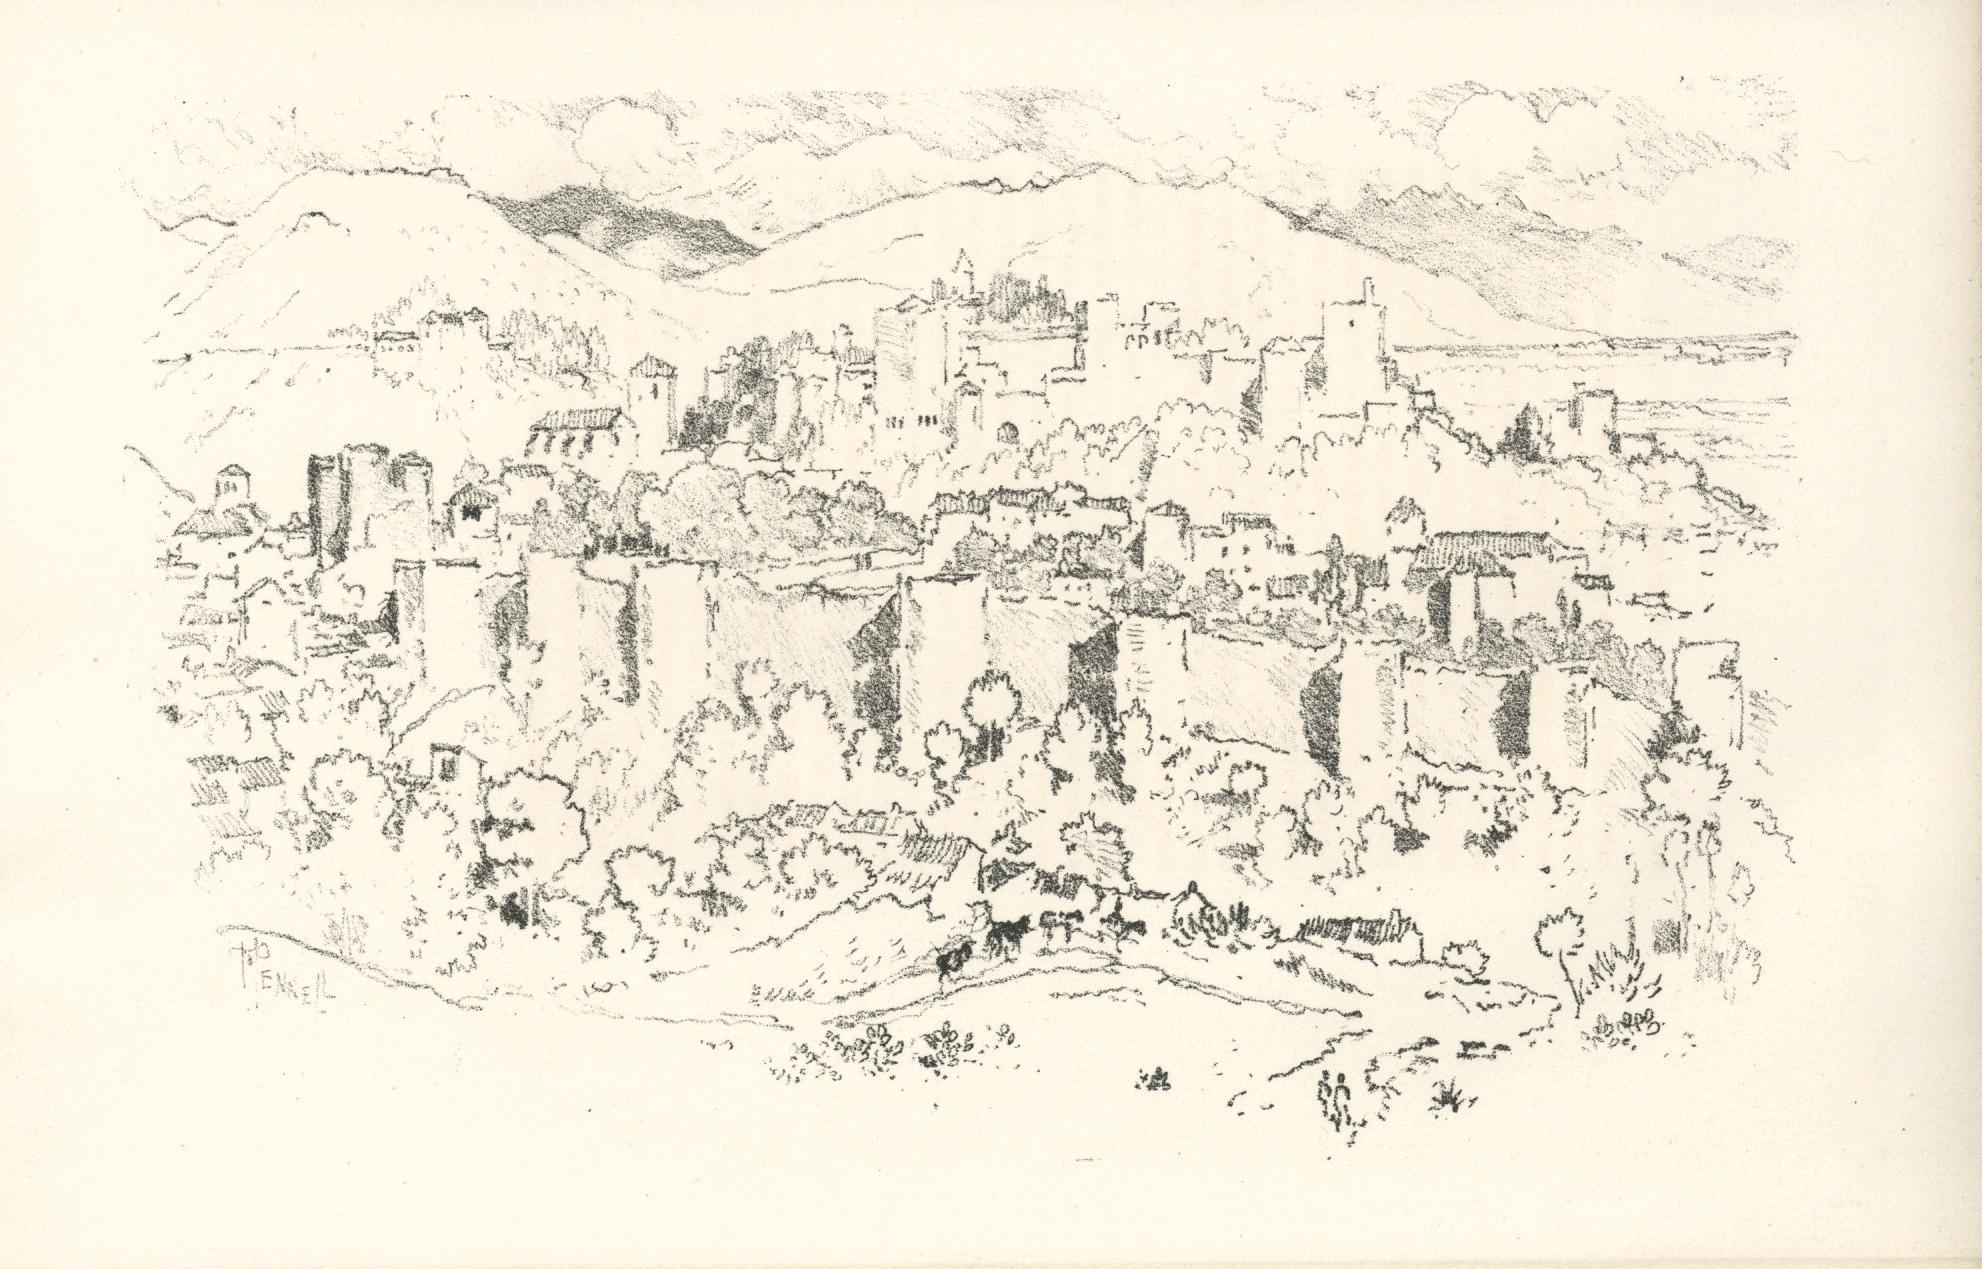 "Alhambra" original lithograph - Print by Joseph Pennell